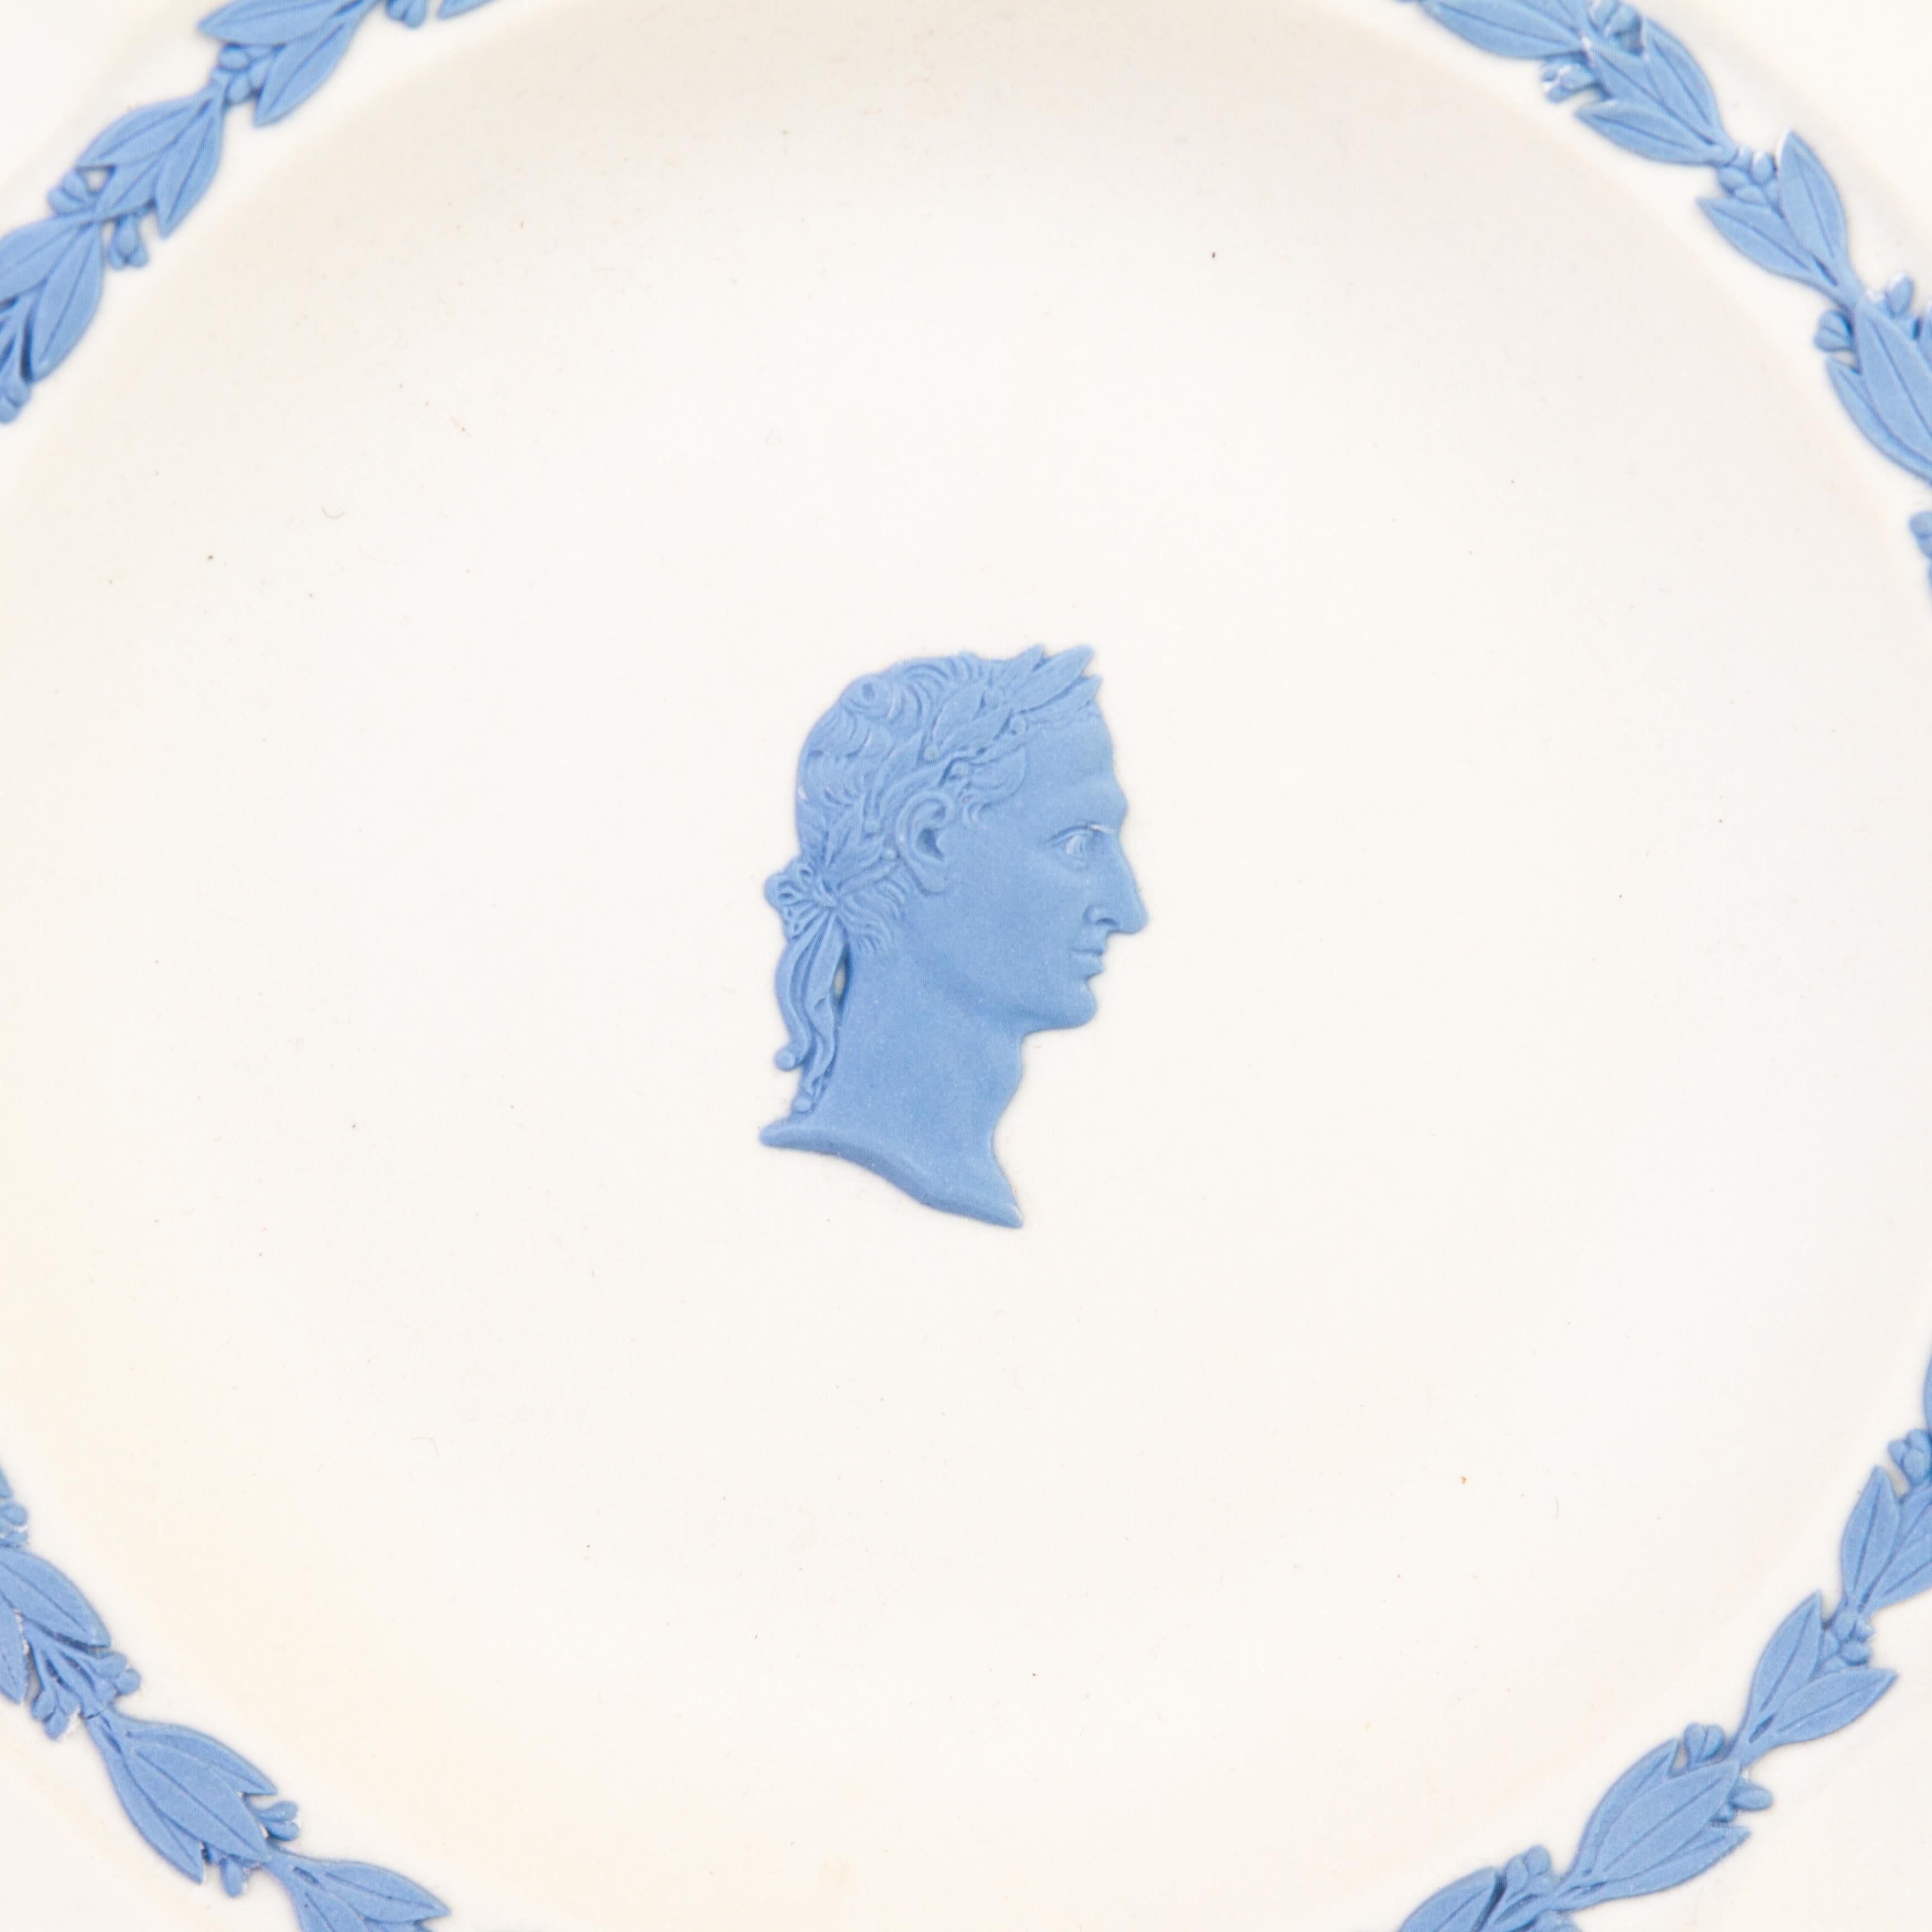 From a private collection.
Free international shipping
Wedgwood Jasperware Julius Caesar Portrait Dish 